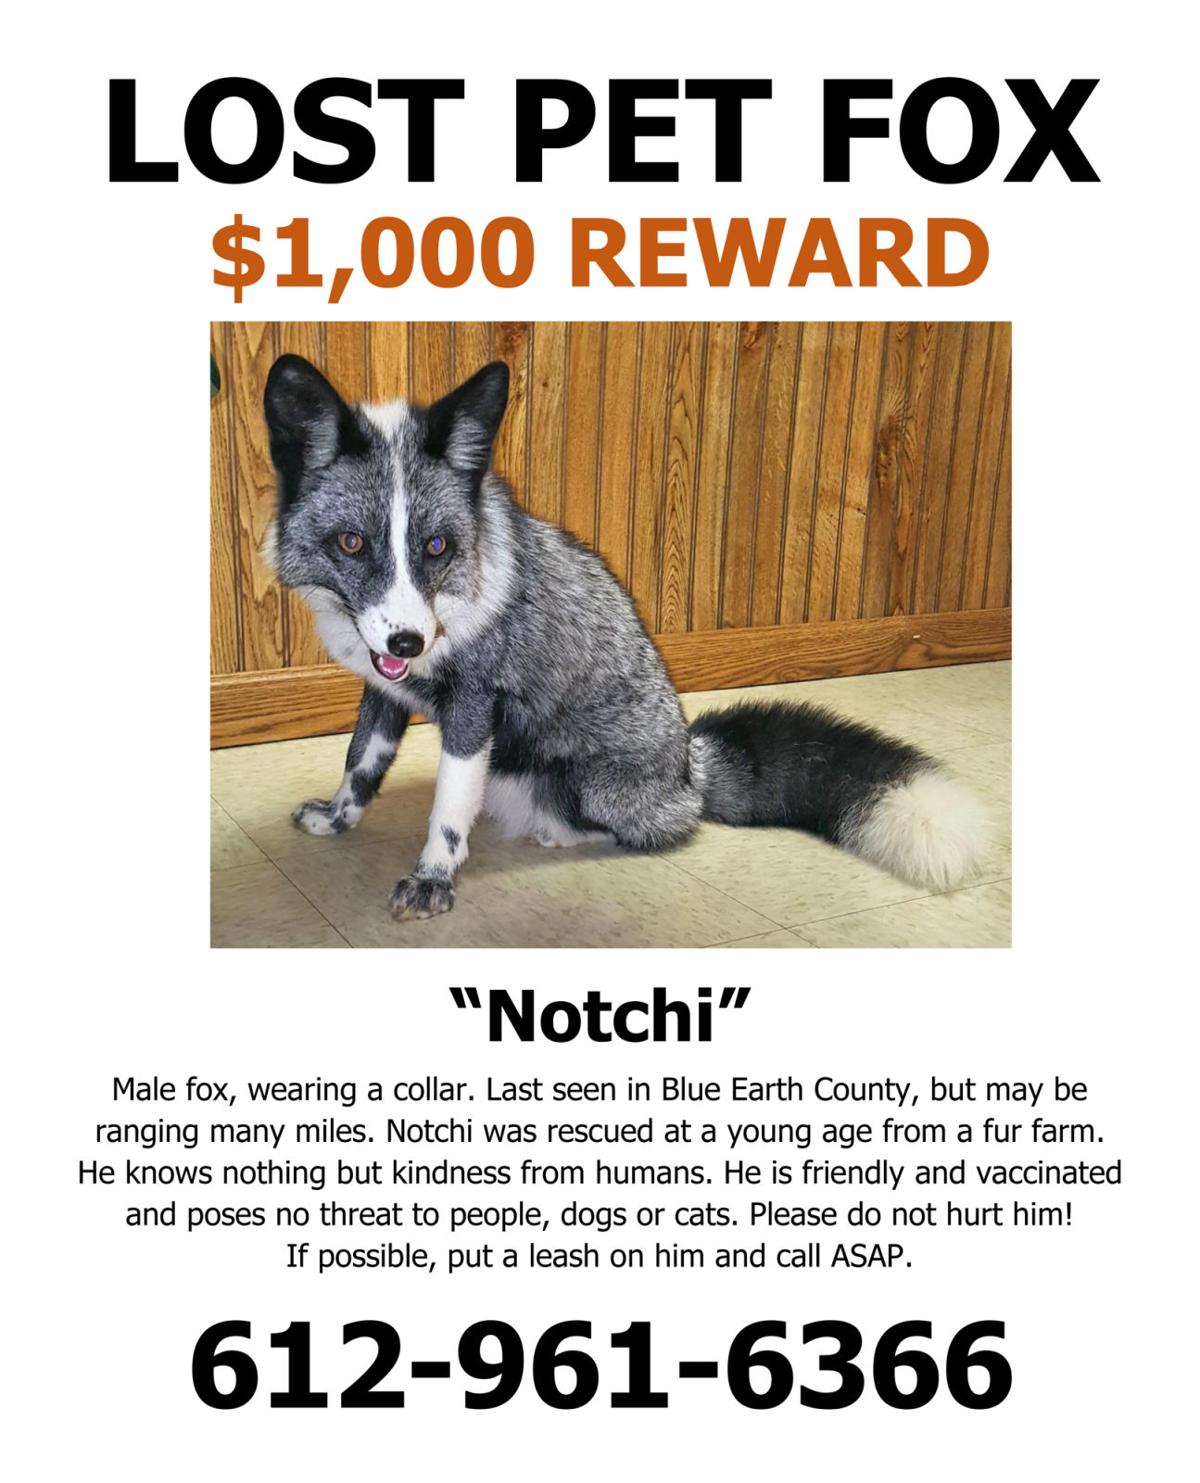 Fox on the run: lost pet fox traverses South Central ...